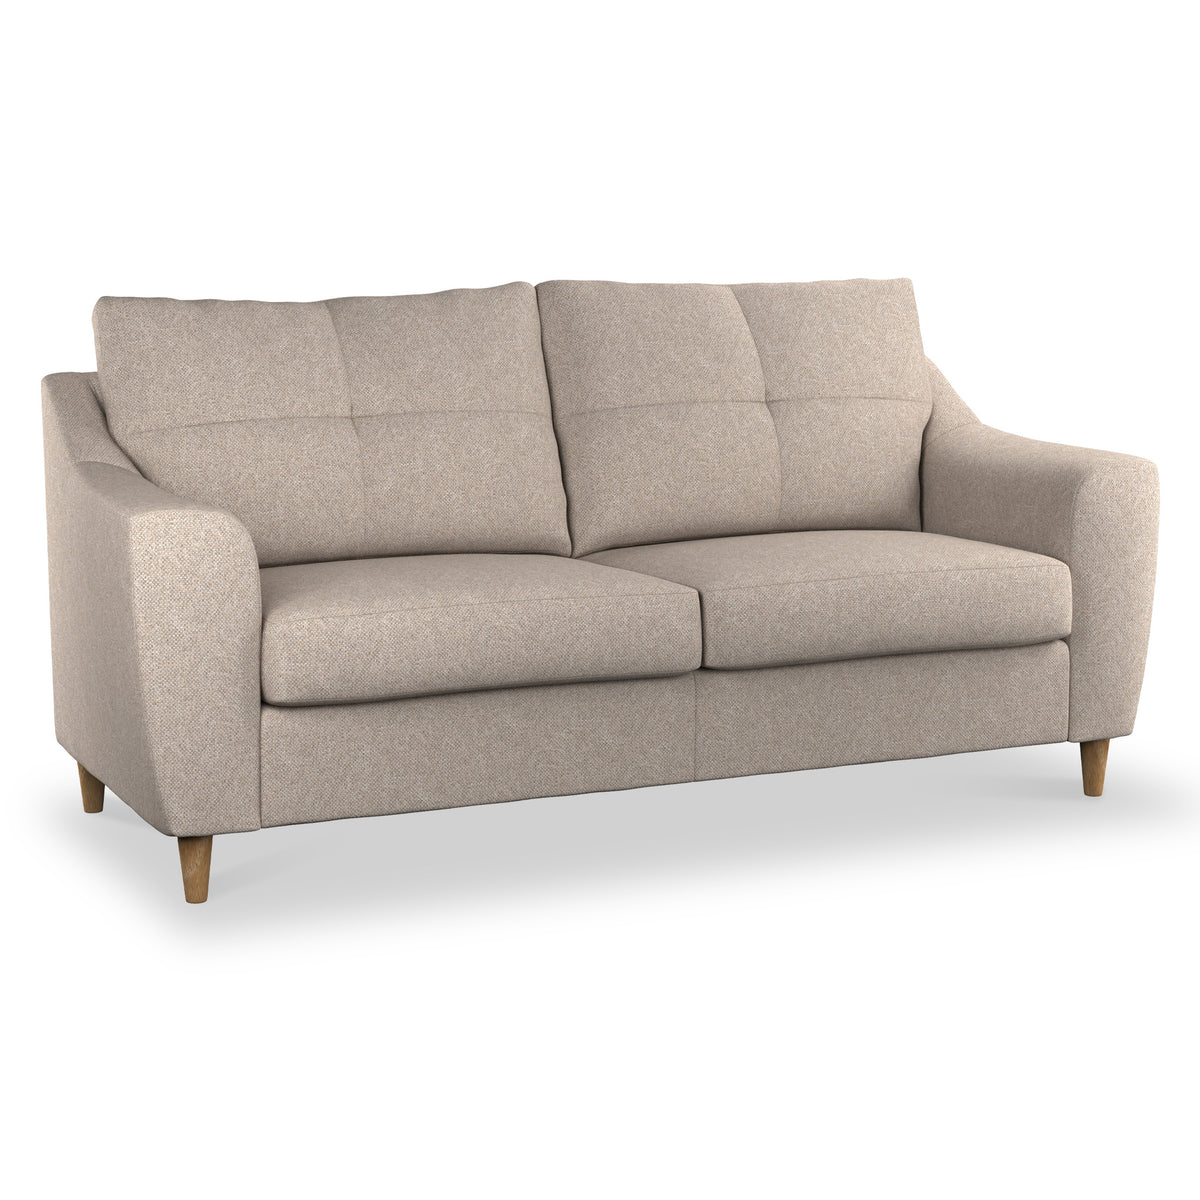 Justin Oatmeal 3 Seater Sofa from Roseland Furniture